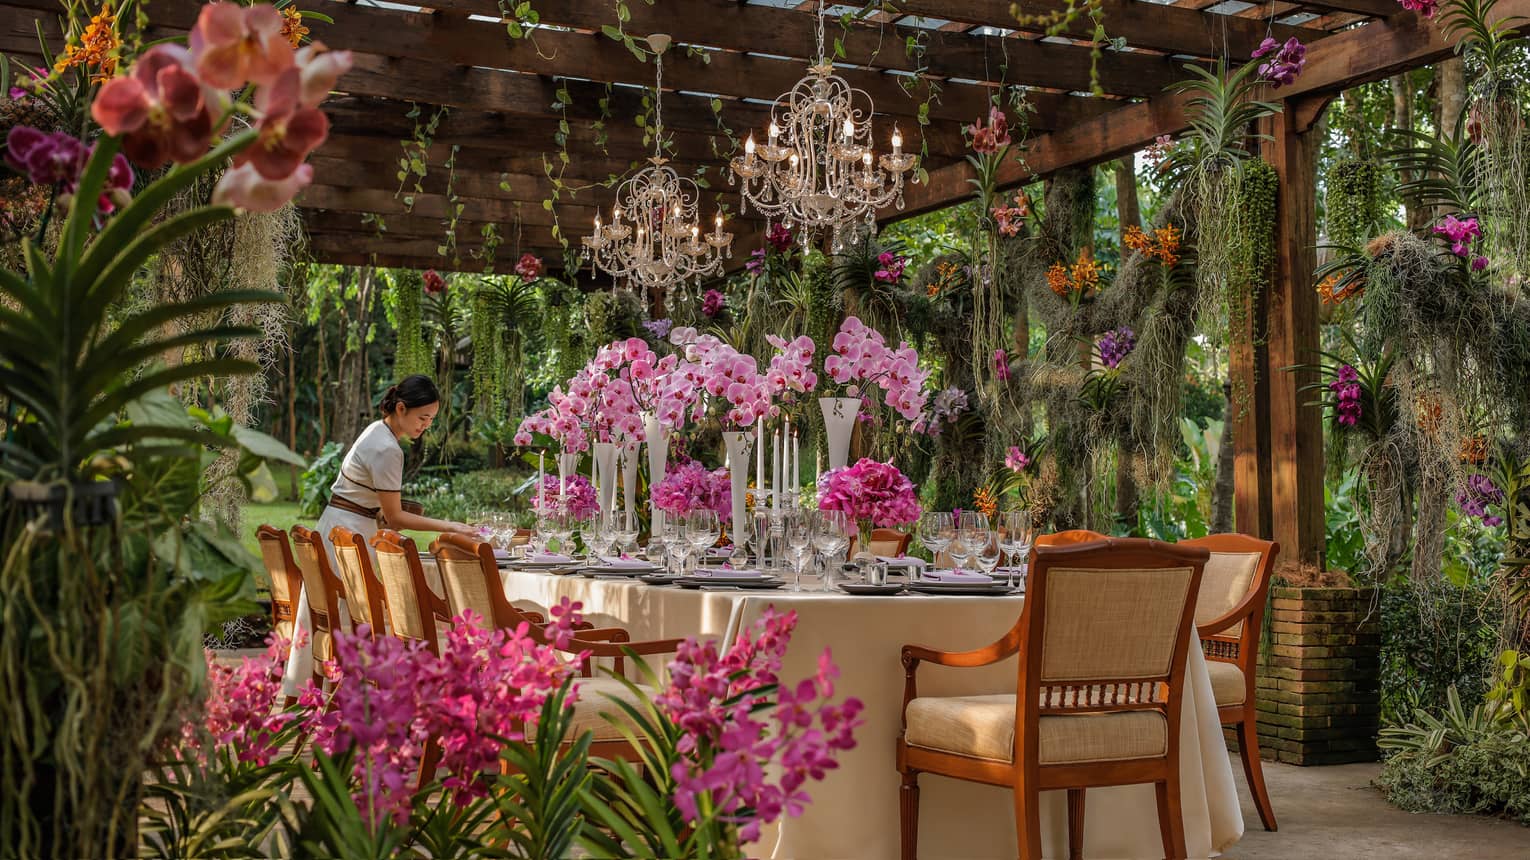 Hotel staff sets large formal dining table in tropical garden, large pink flowers under small crystal chandeliers